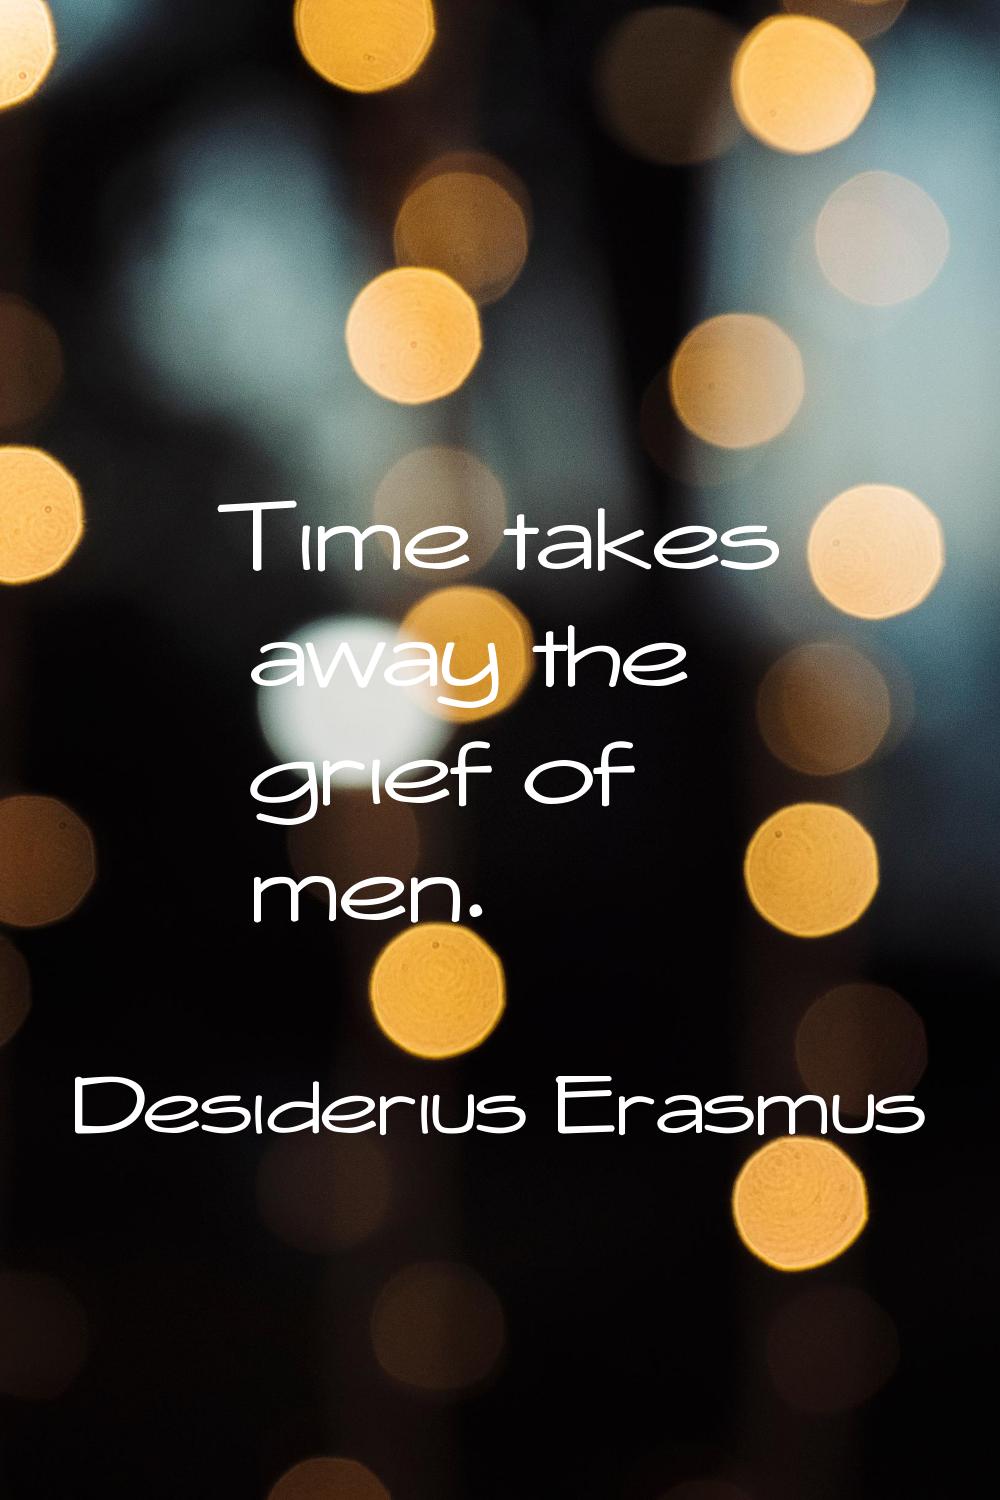 Time takes away the grief of men.